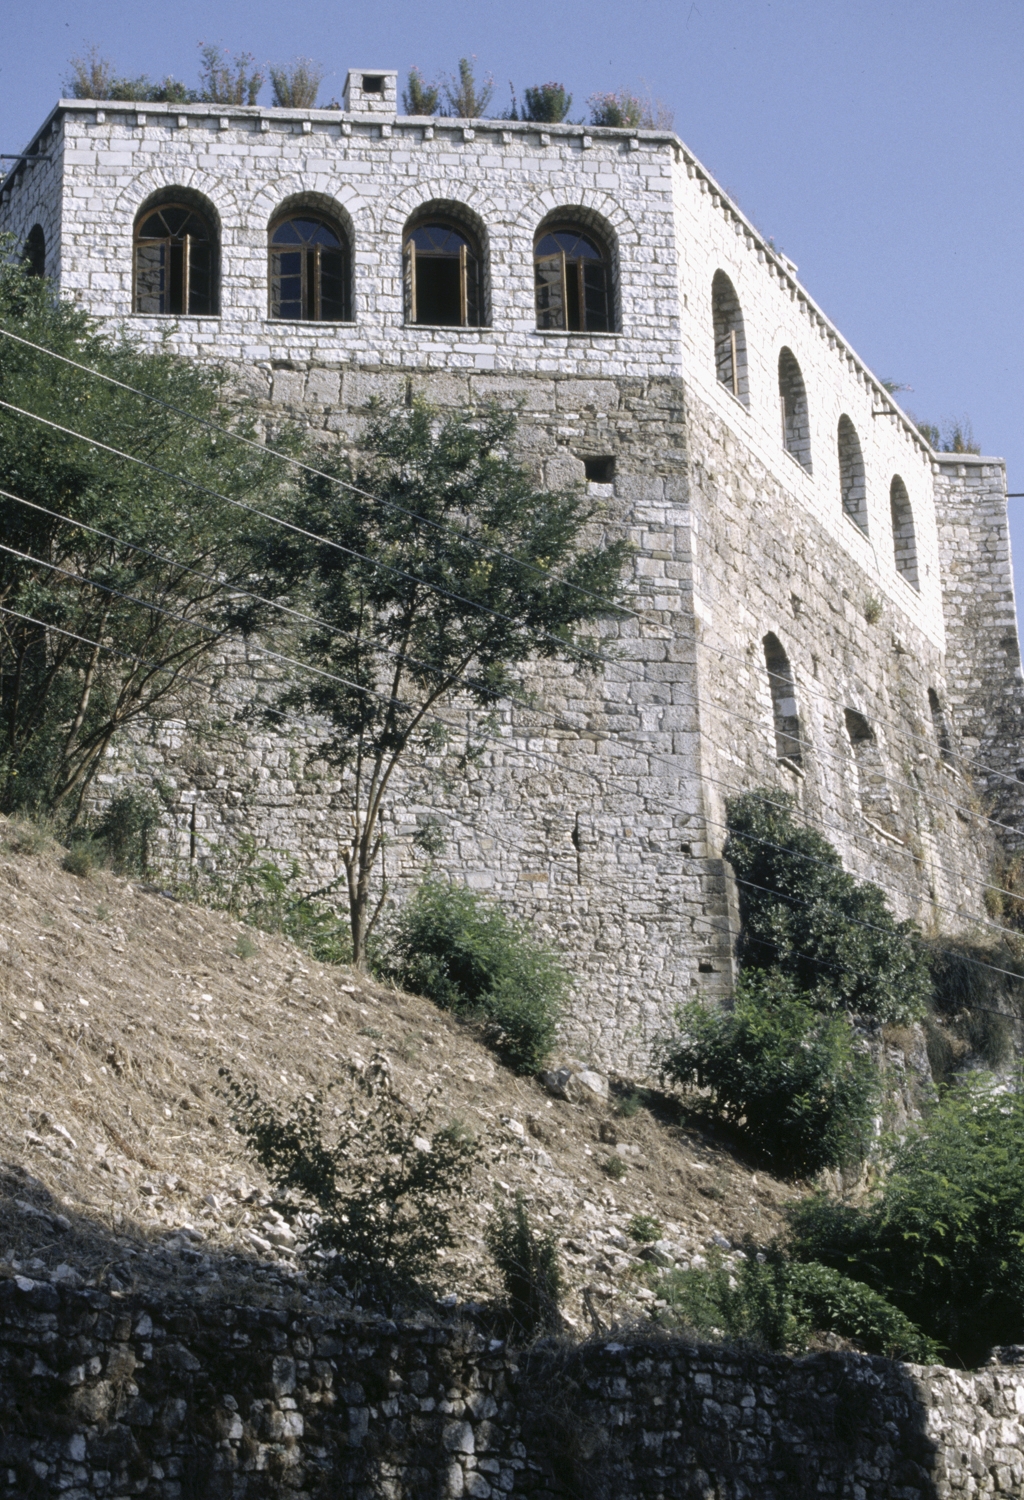 View from below of fortress on hilltop, with restored upper story